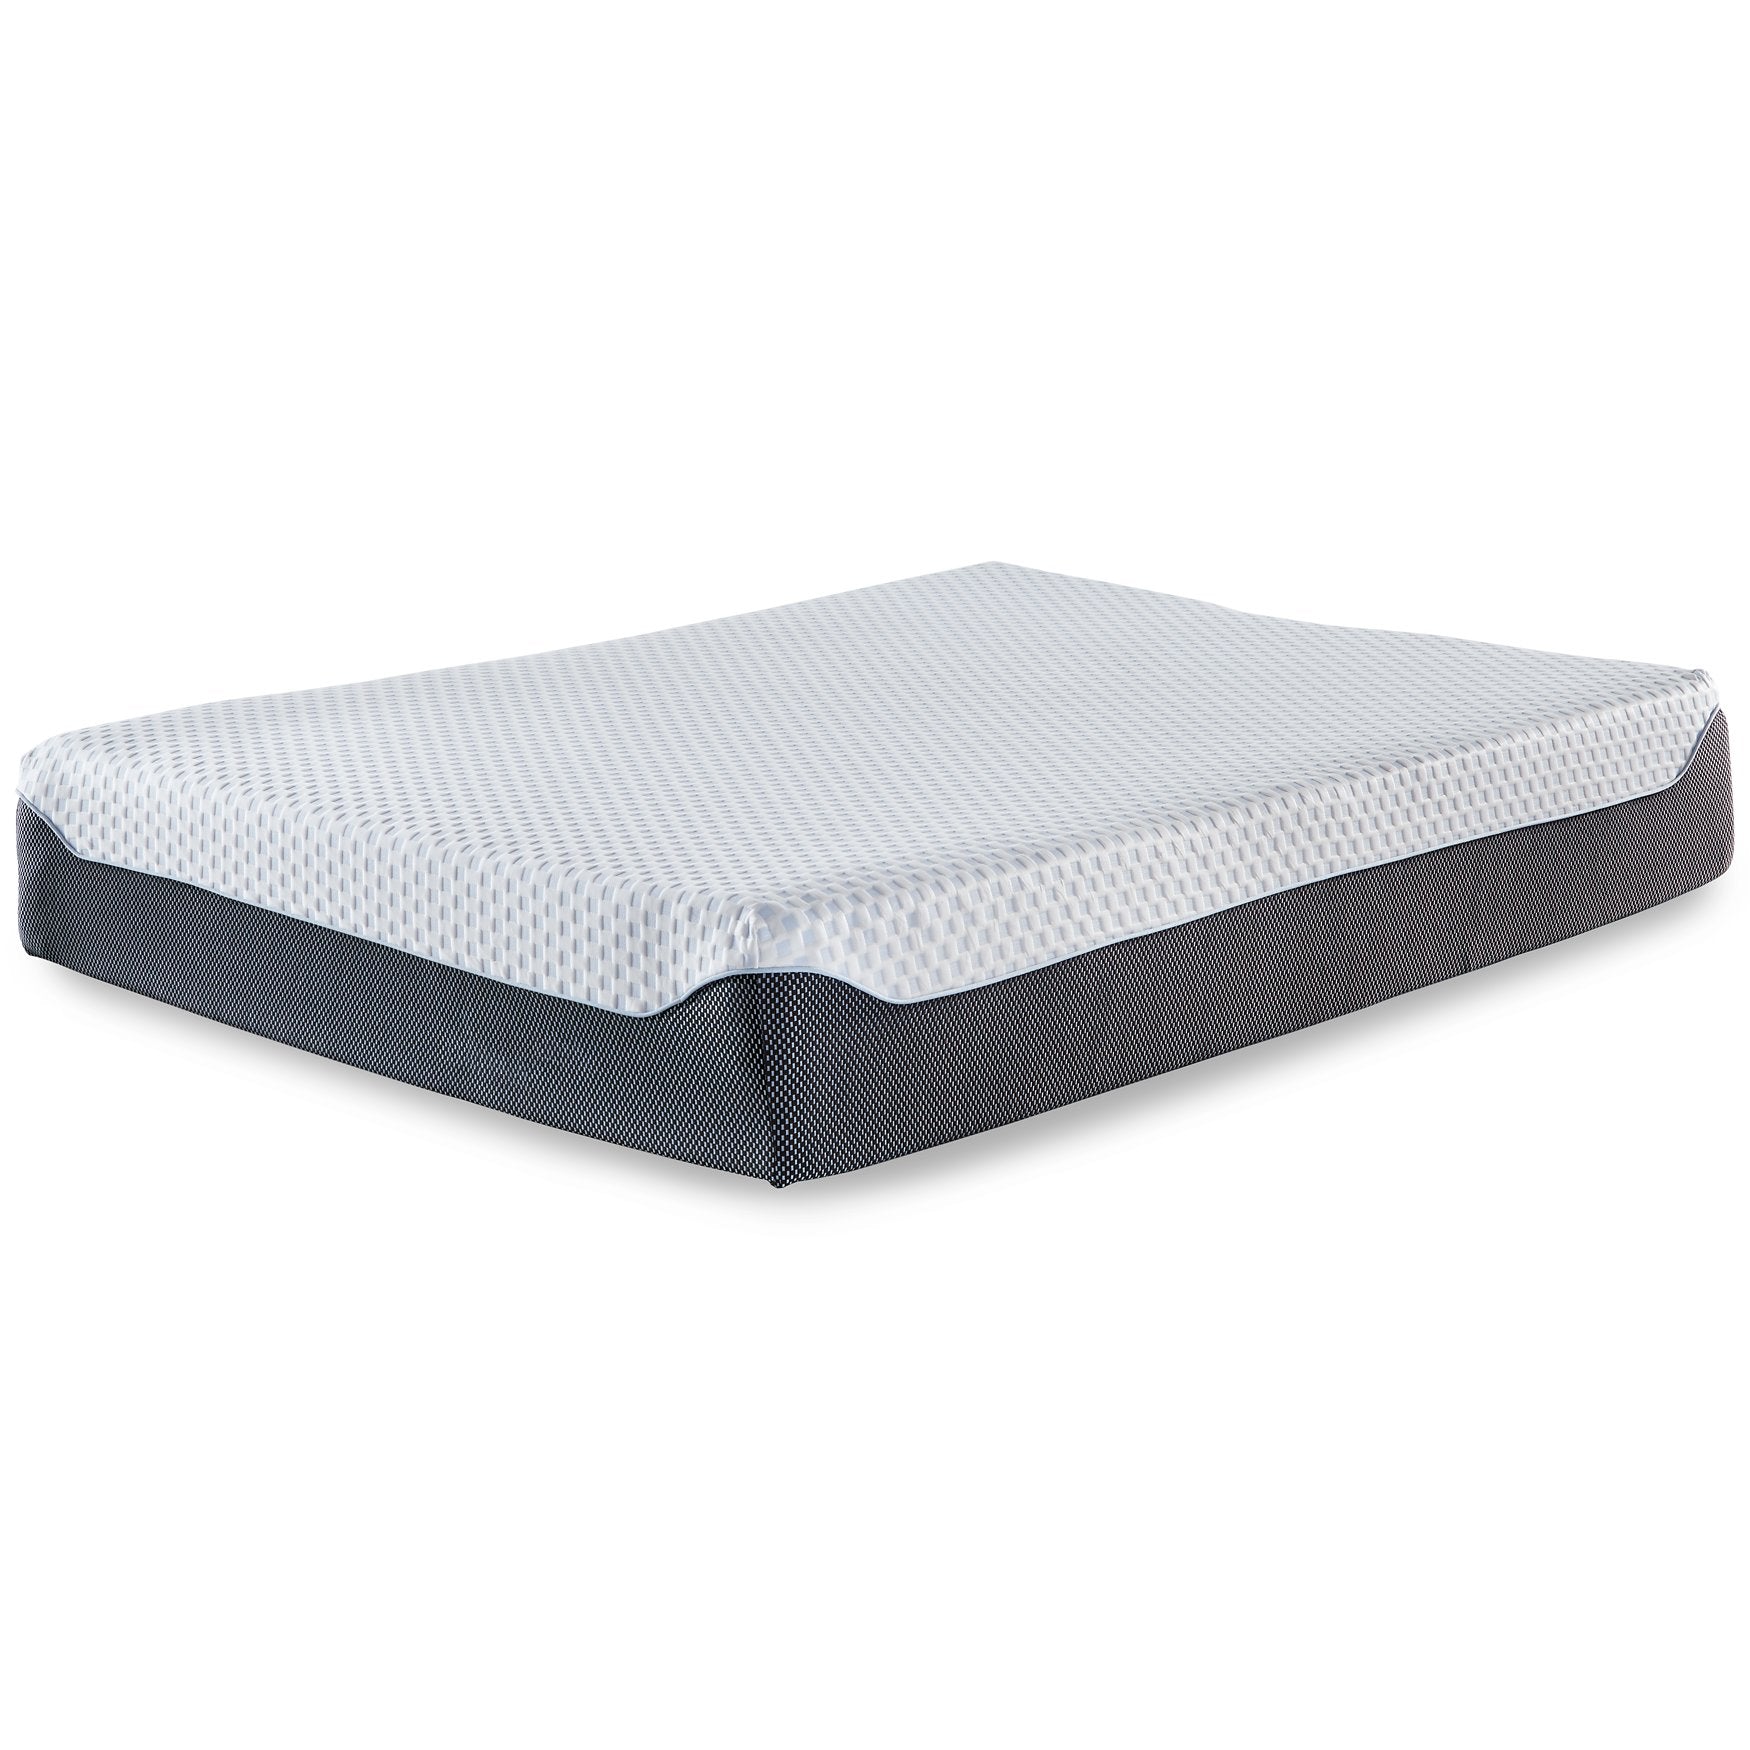 12 Inch Chime Elite Adjustable Base with Mattress 12 Inch Chime Elite Adjustable Base with Mattress Half Price Furniture